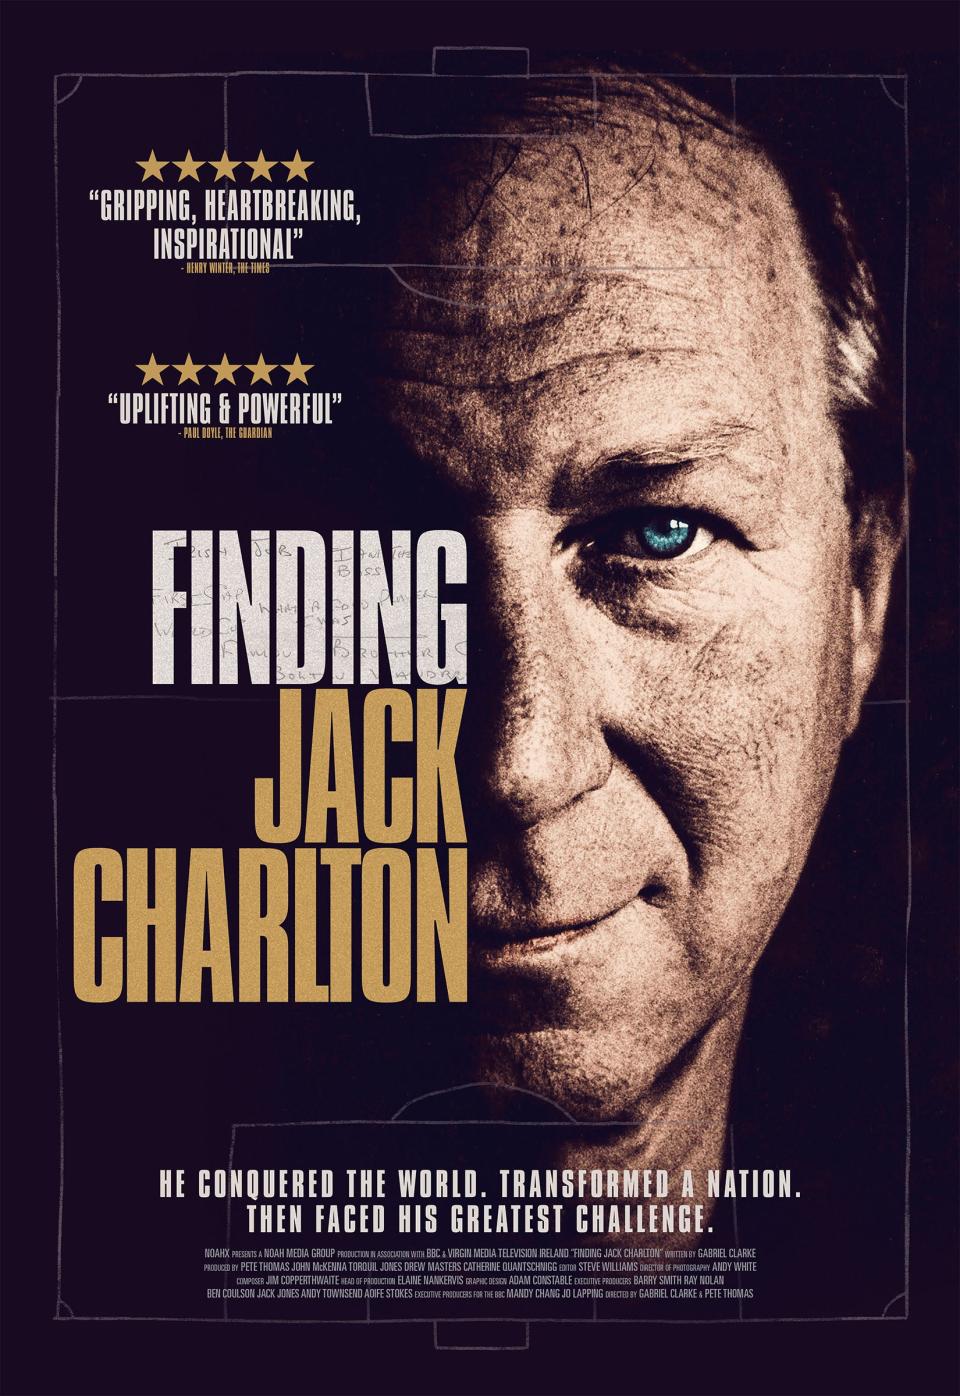 <p>Finding Jack Charlton celebrates his life while also confronting dementia</p>Finding Jack Charlton